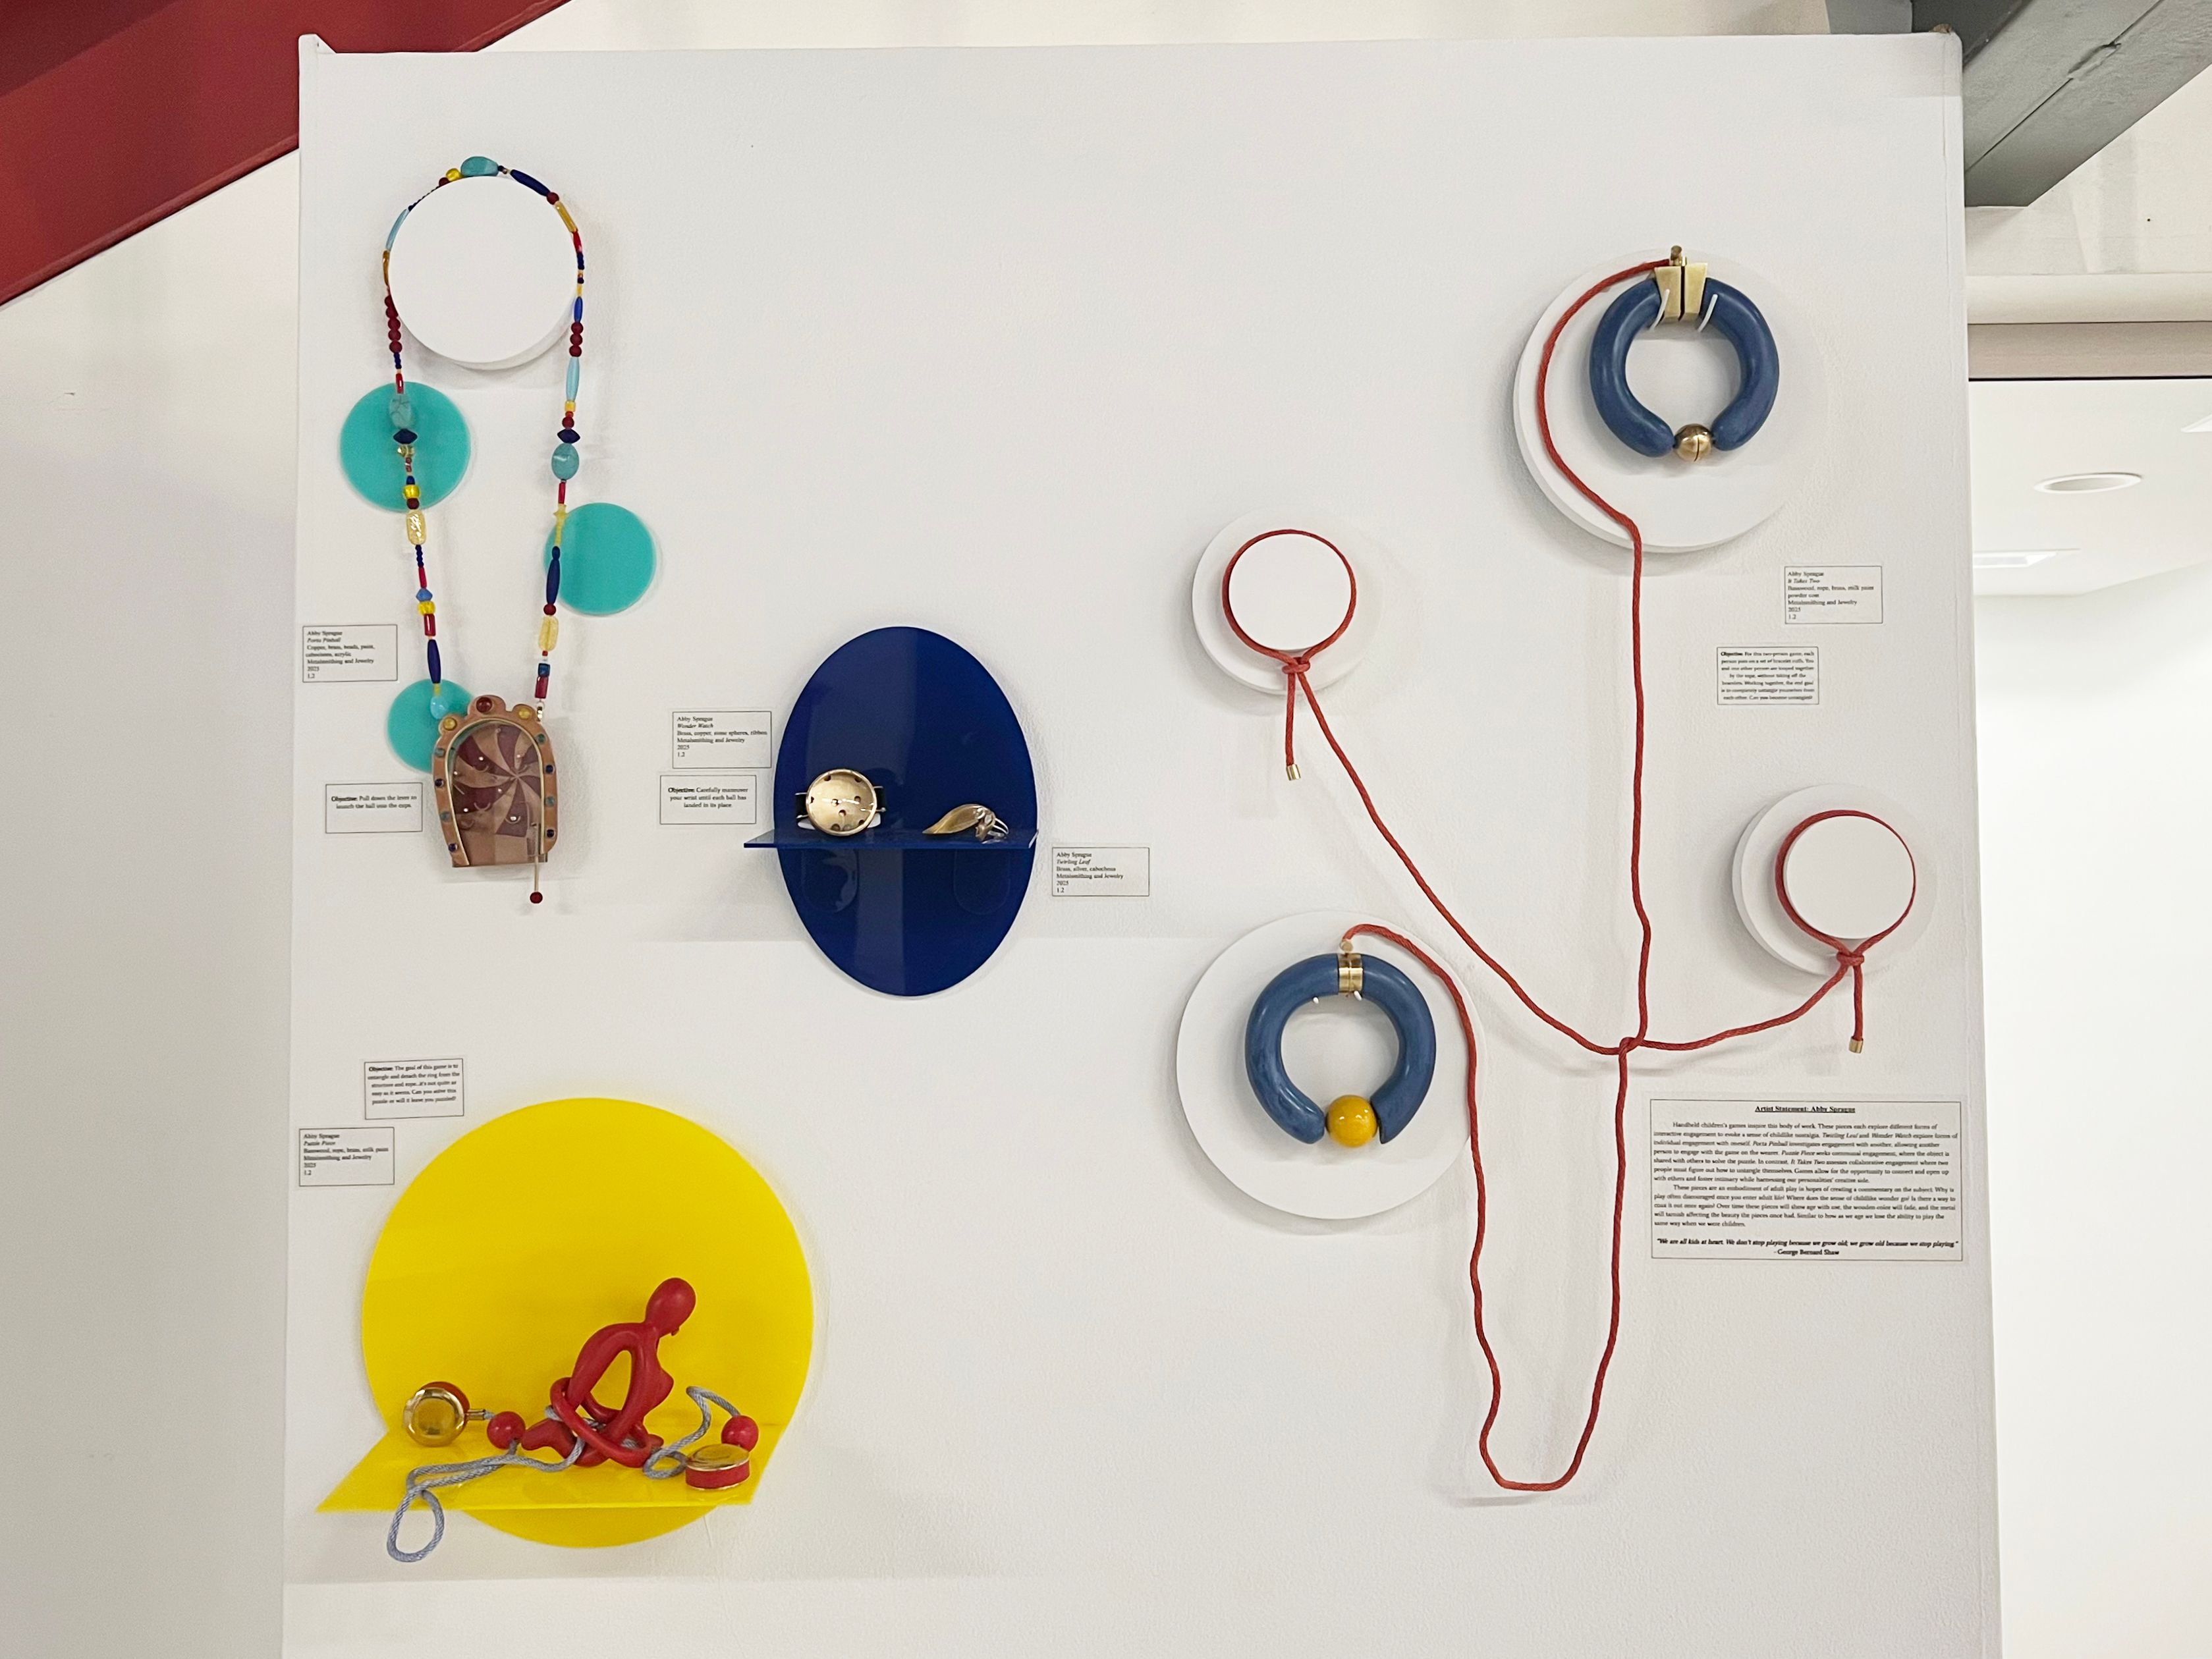 Installation of jewelry with bright colors and circular shapes.